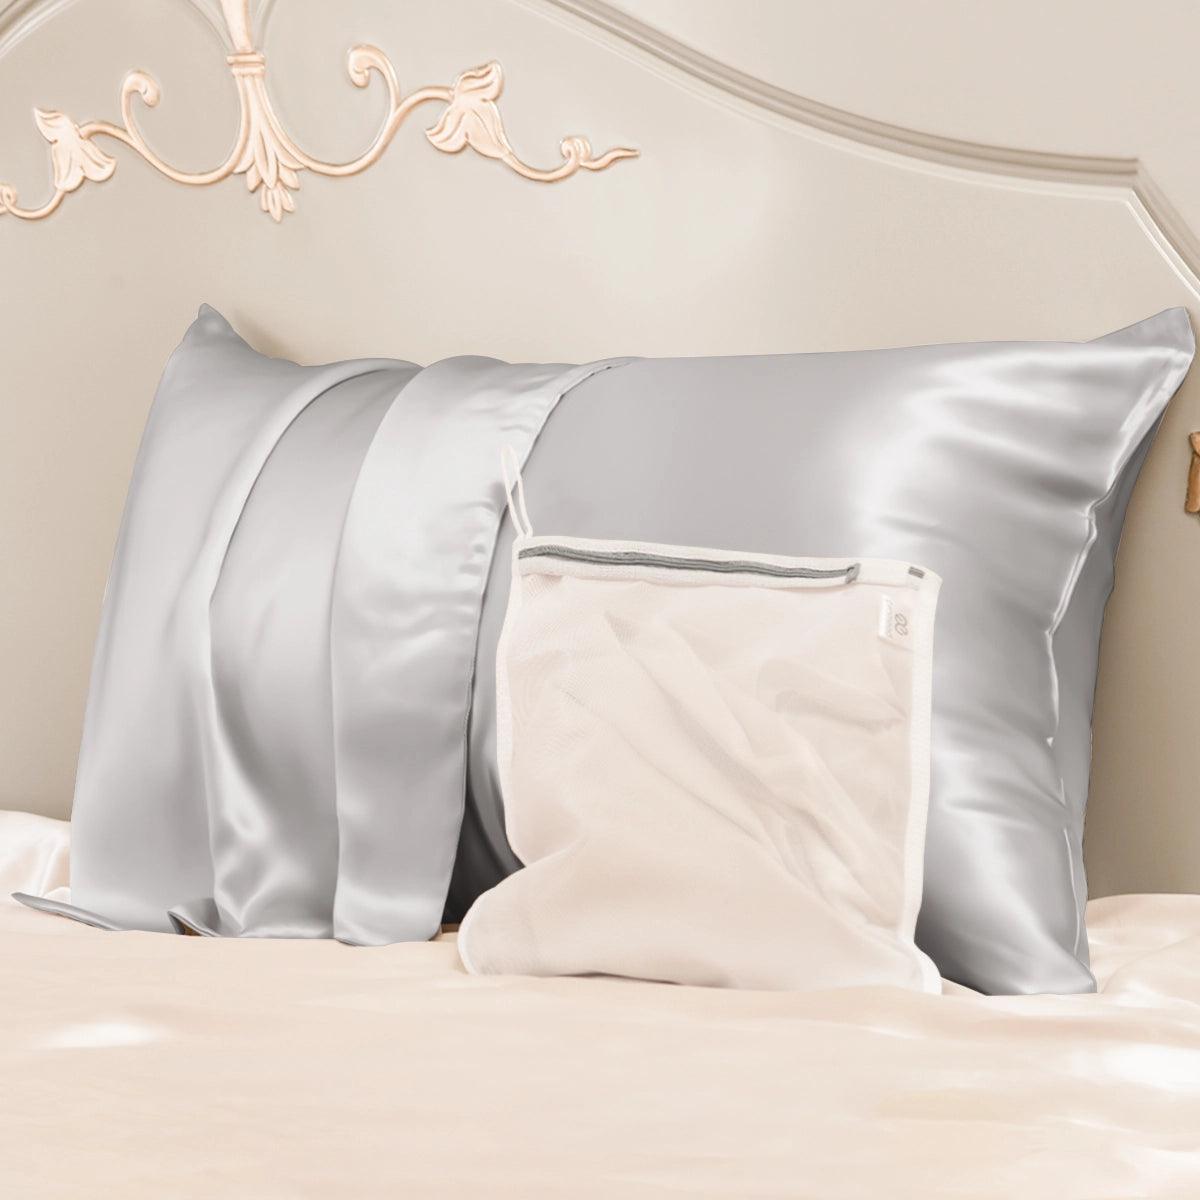 23 mm 6A+ Silk Pillowcase With Zipper With Laundry Bag - promeedsilk